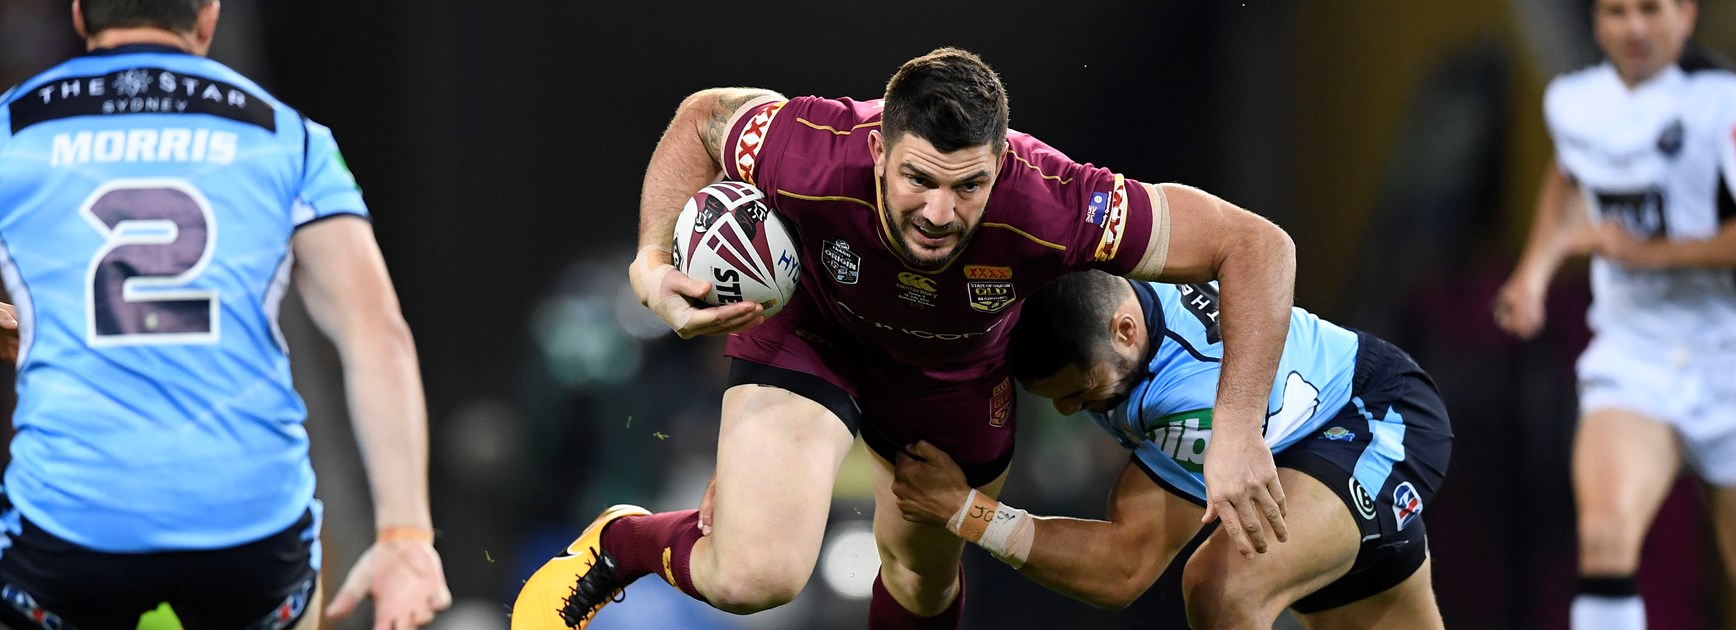 Gillett inspired by text from Peats